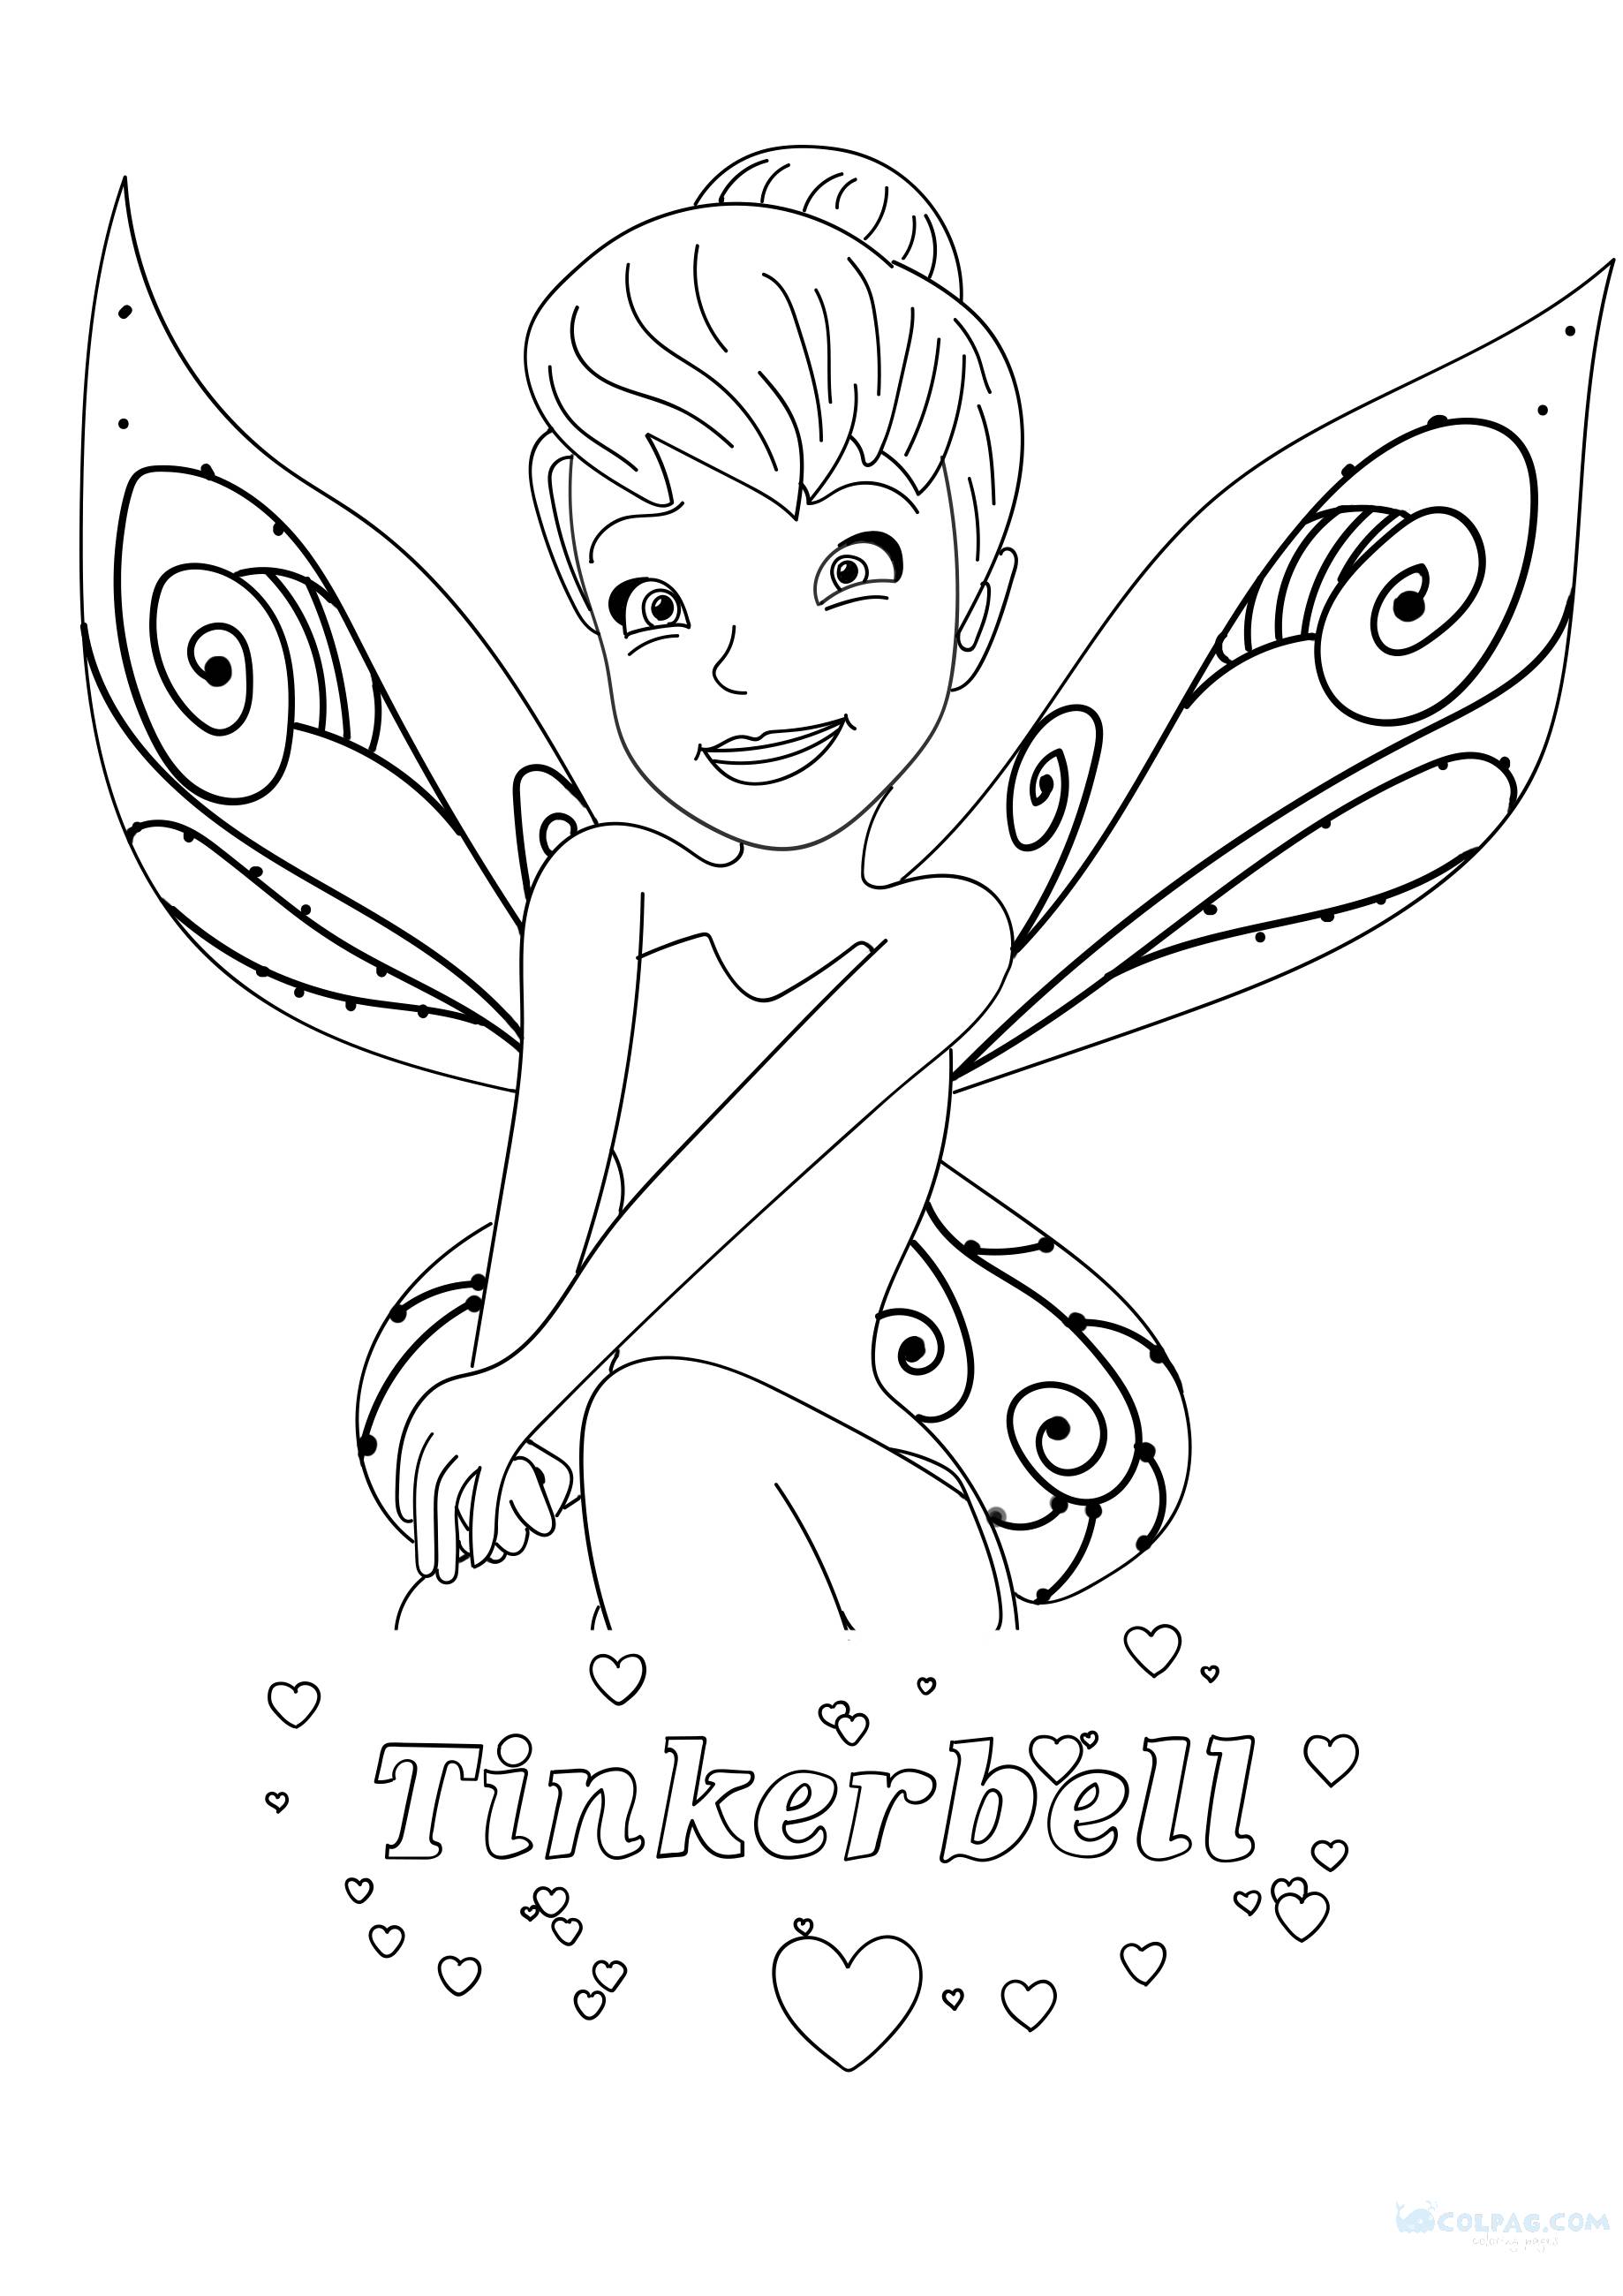 tinkerbell-coloring-page-colpag-com-1